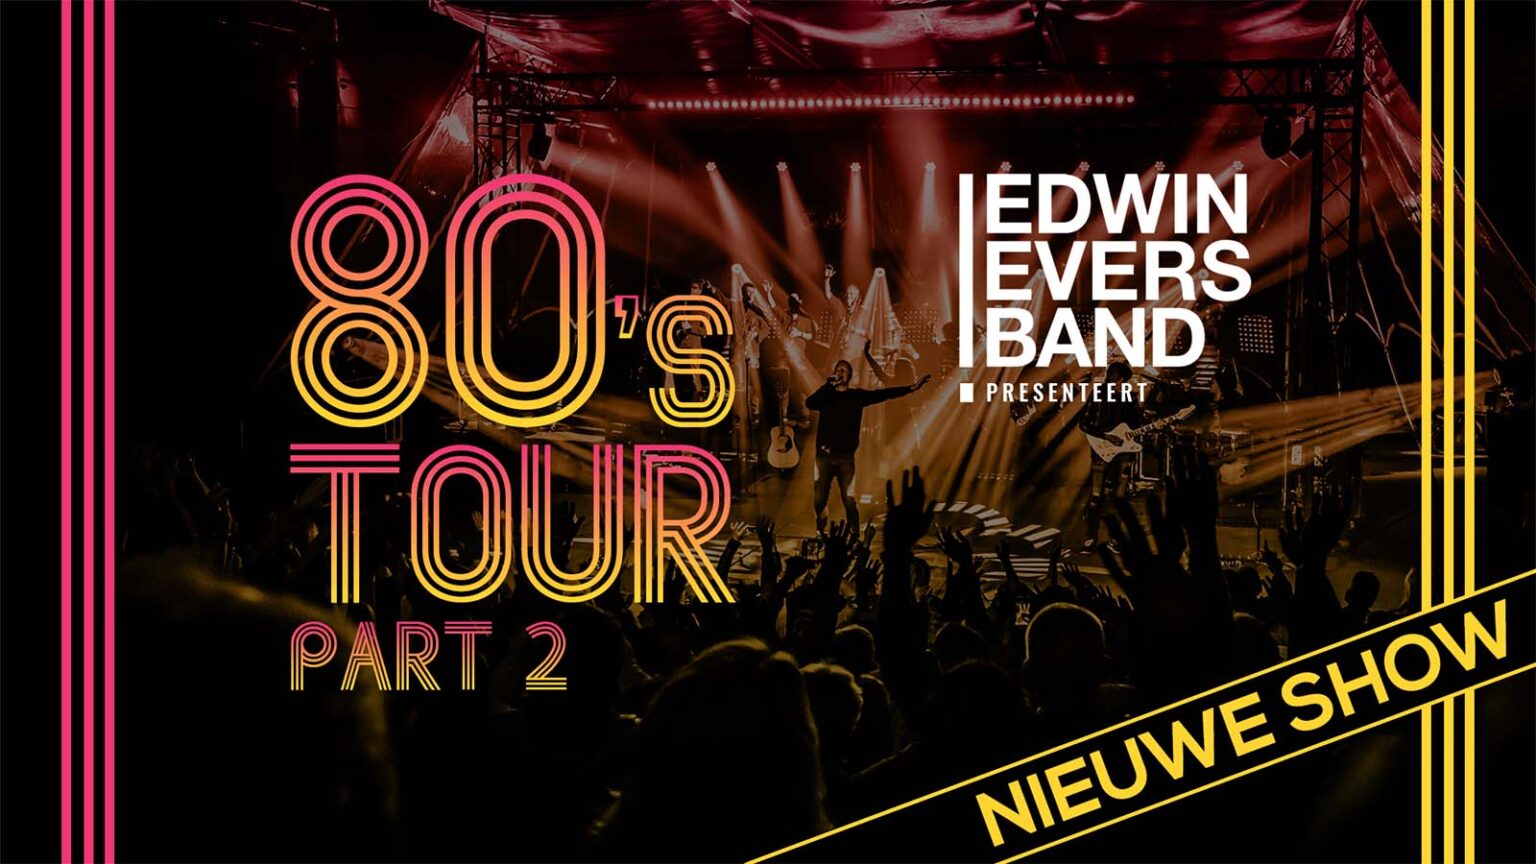 Edwin Evers Band 80’s tour